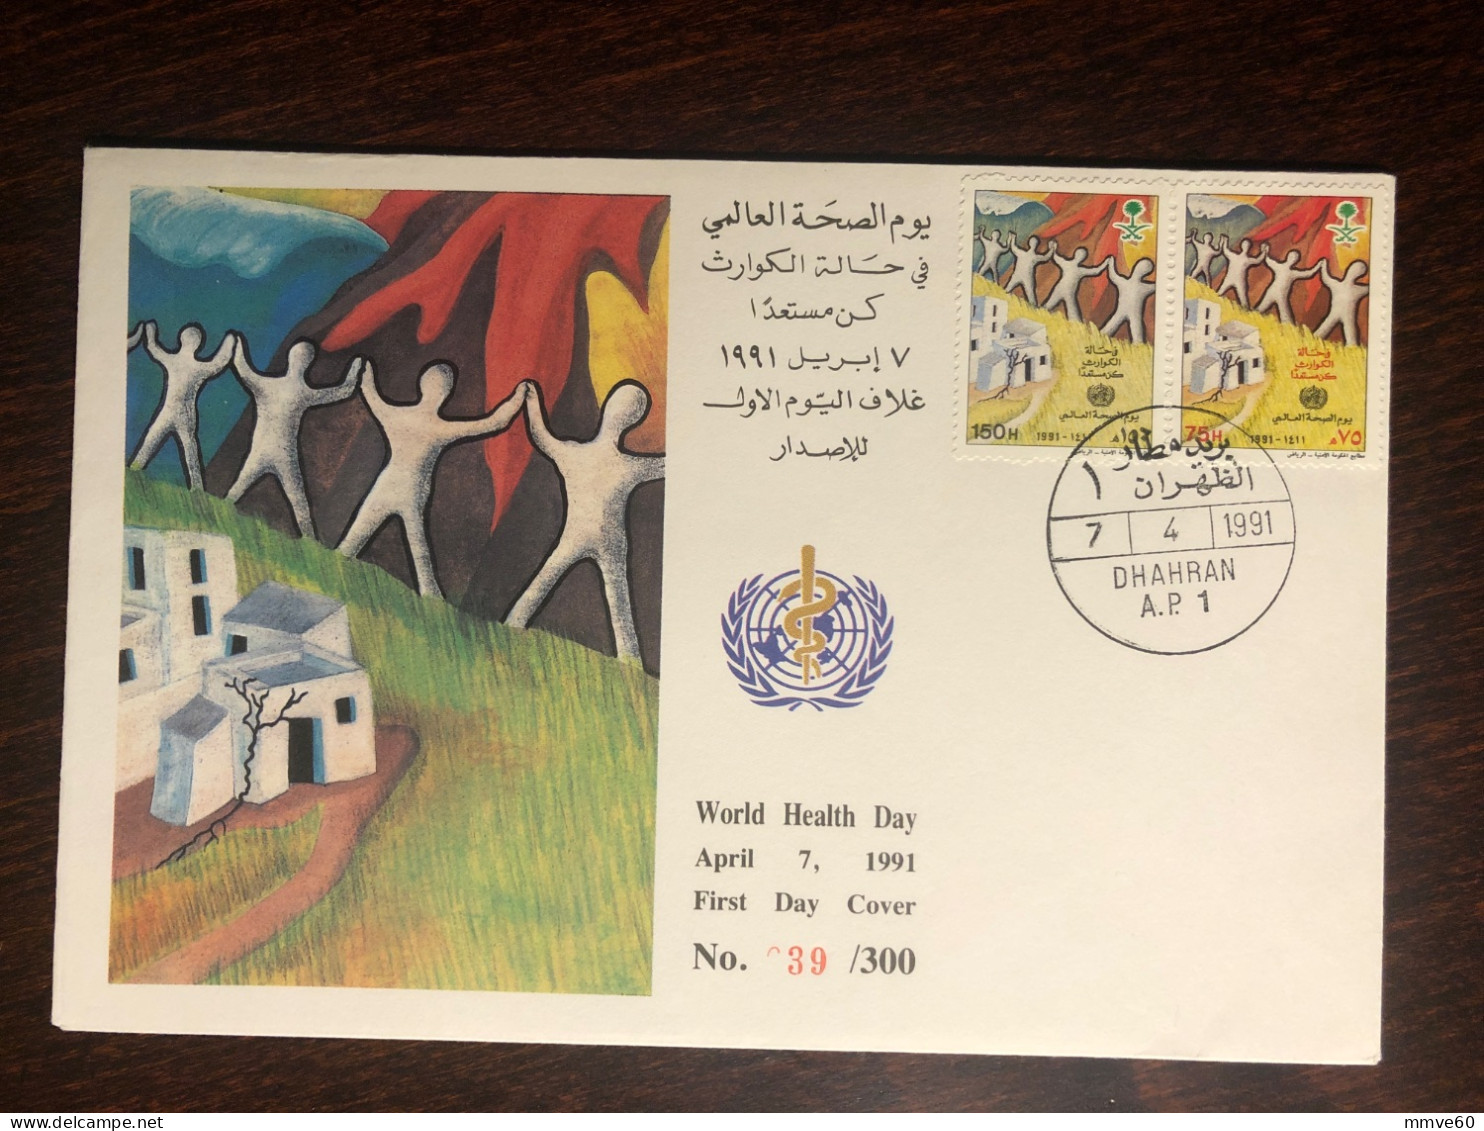 SAUDI ARABIA FDC COVER ONLY 300 ISSUED 1991 YEAR WHO HEALTH MEDICINE STAMPS - Saudi Arabia